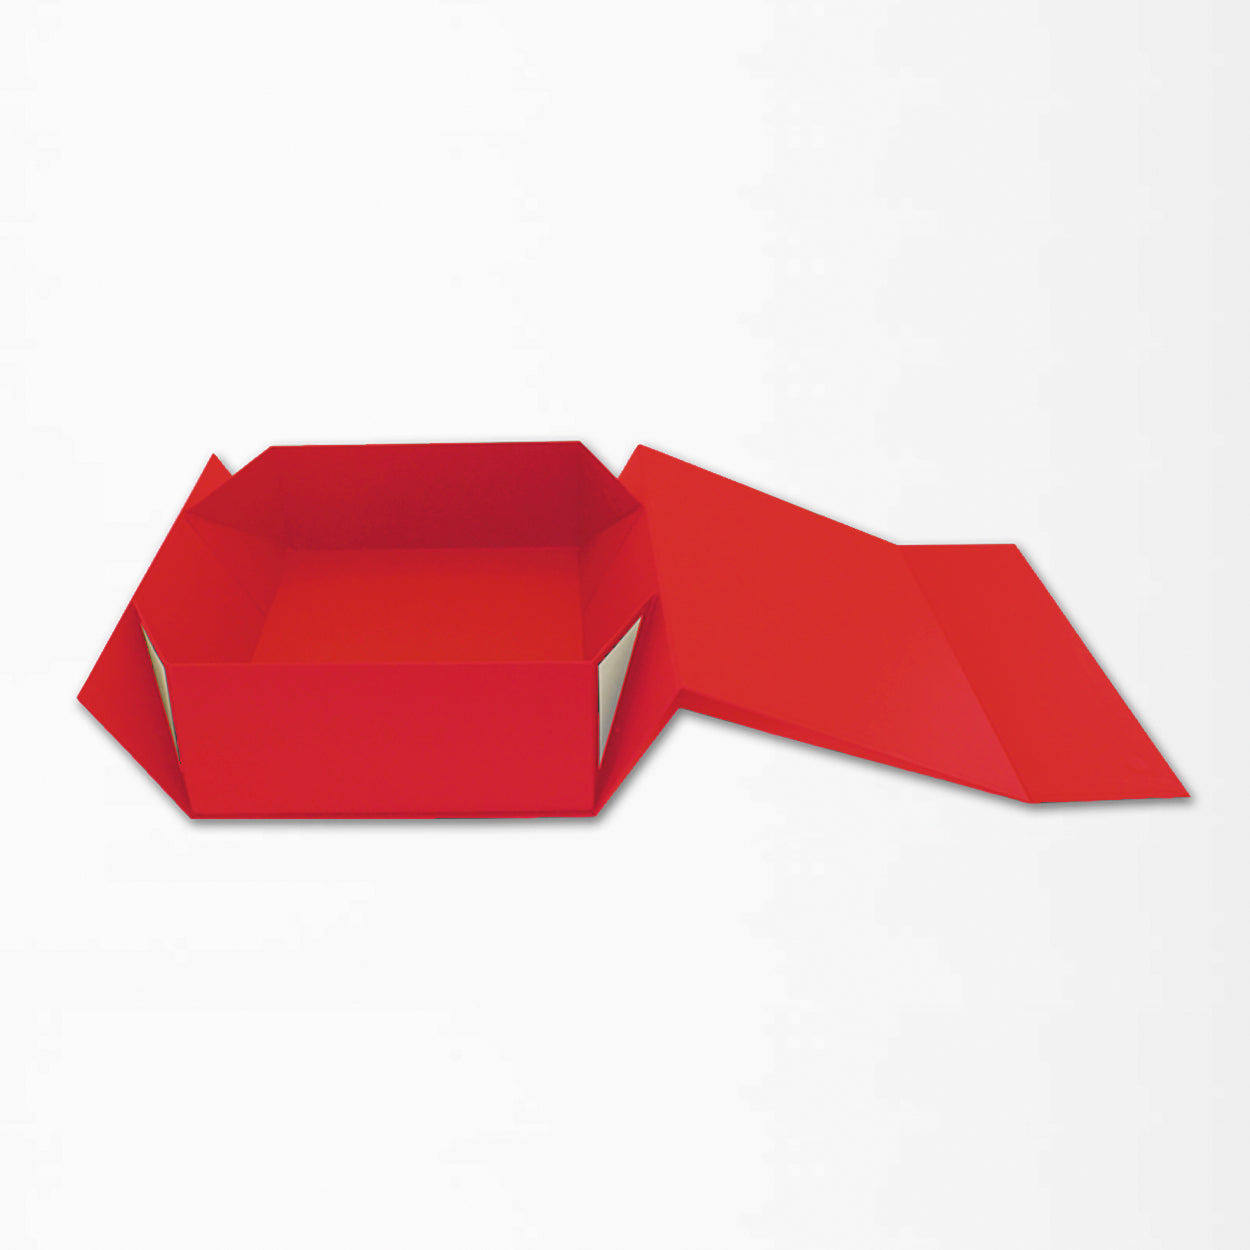 White Luxury collapsible box - hot stamping on a predefined orange area